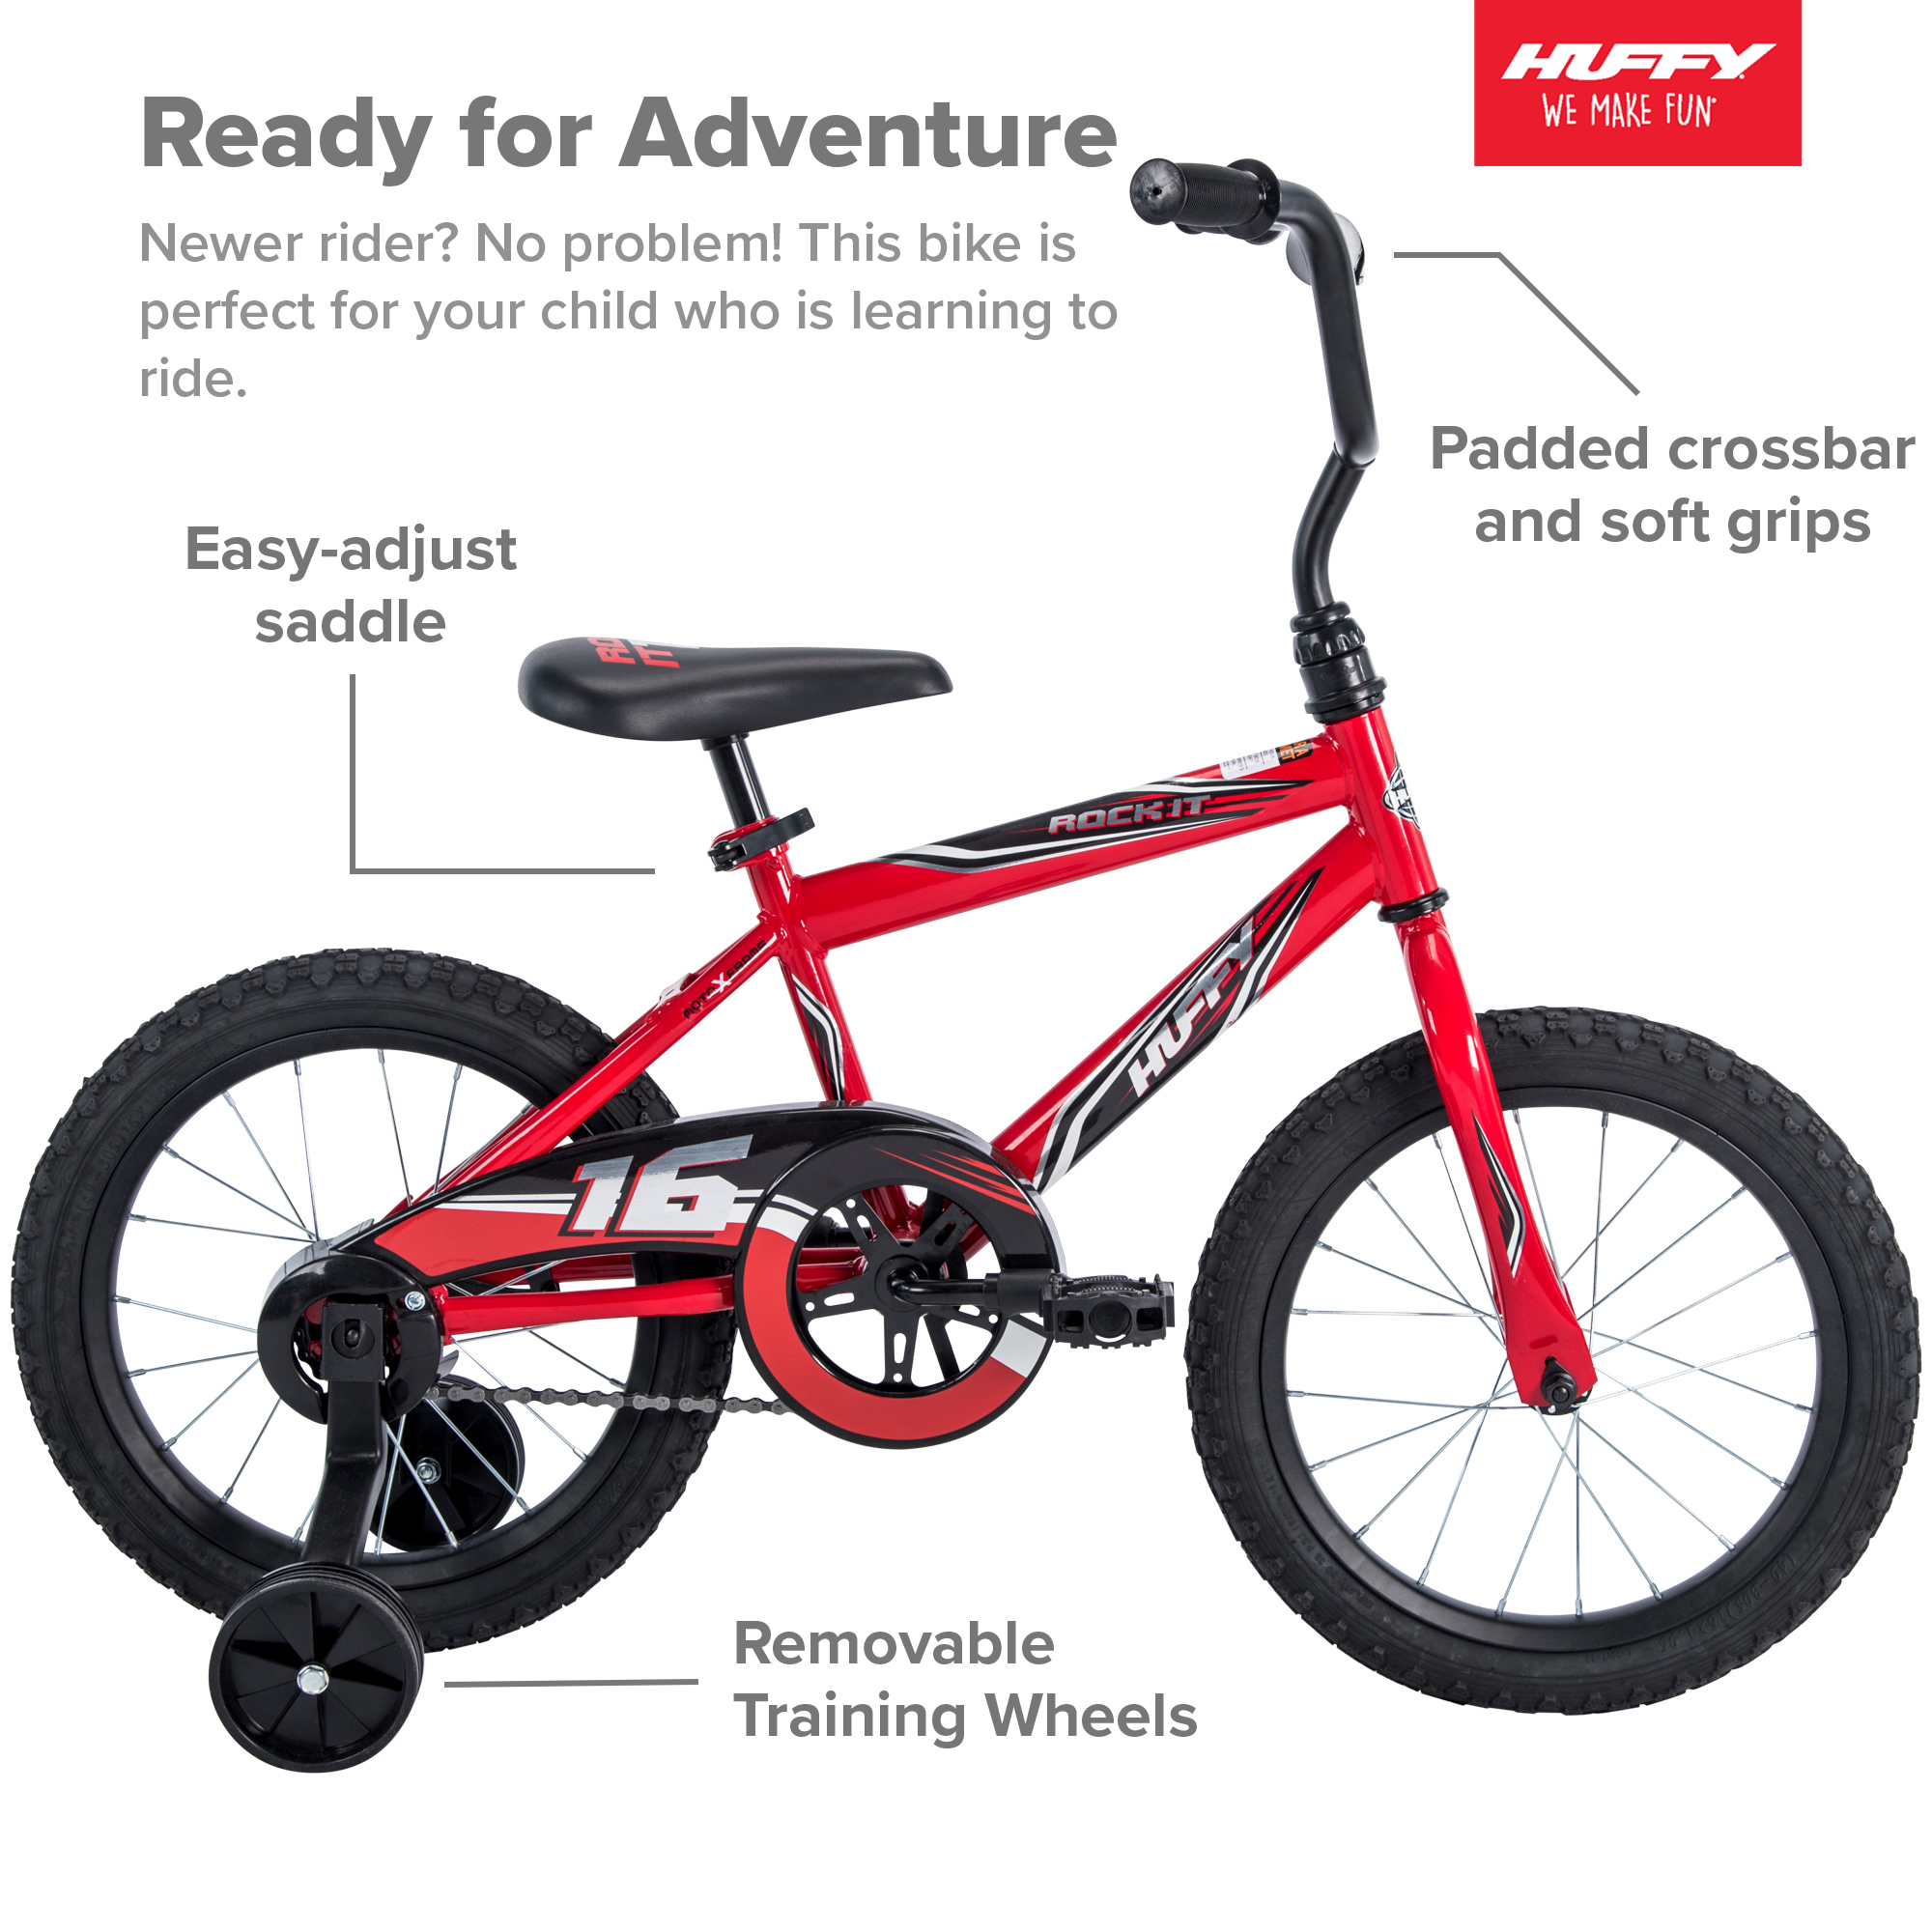 Huffy 16 in. Rock It Kids Bike for Boy Ages 4 and up, Child, Red - image 3 of 10